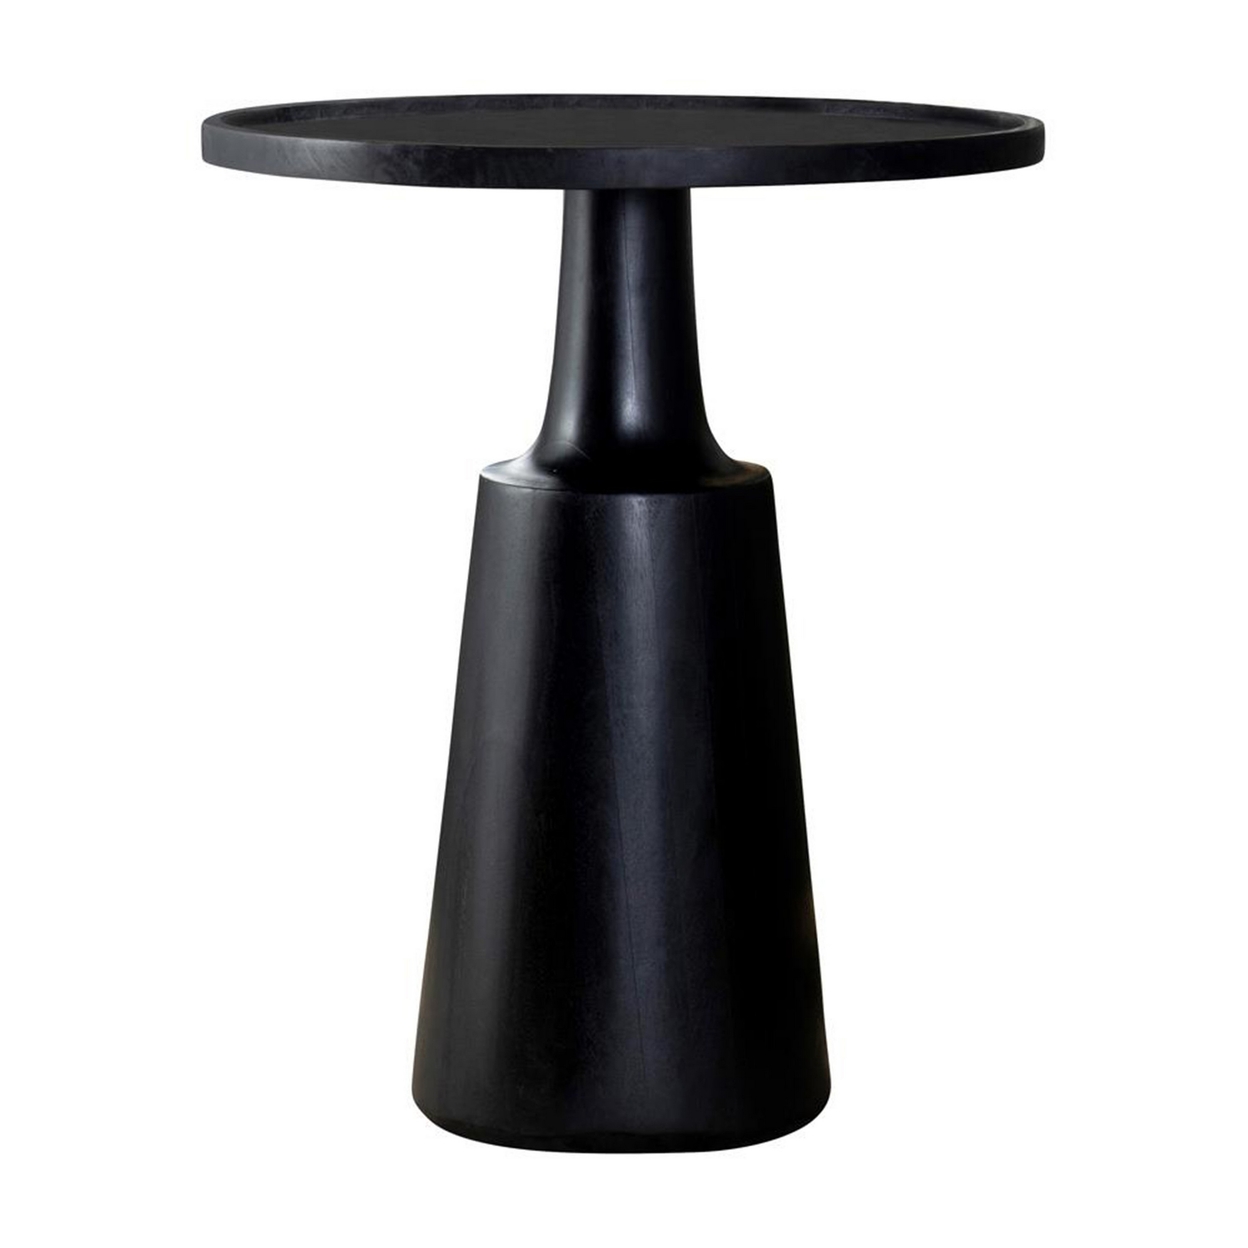 Coch 24 Inch Artisan Accent Table With Round Tabletop, Tapered Base, Black- Saltoro Sherpi